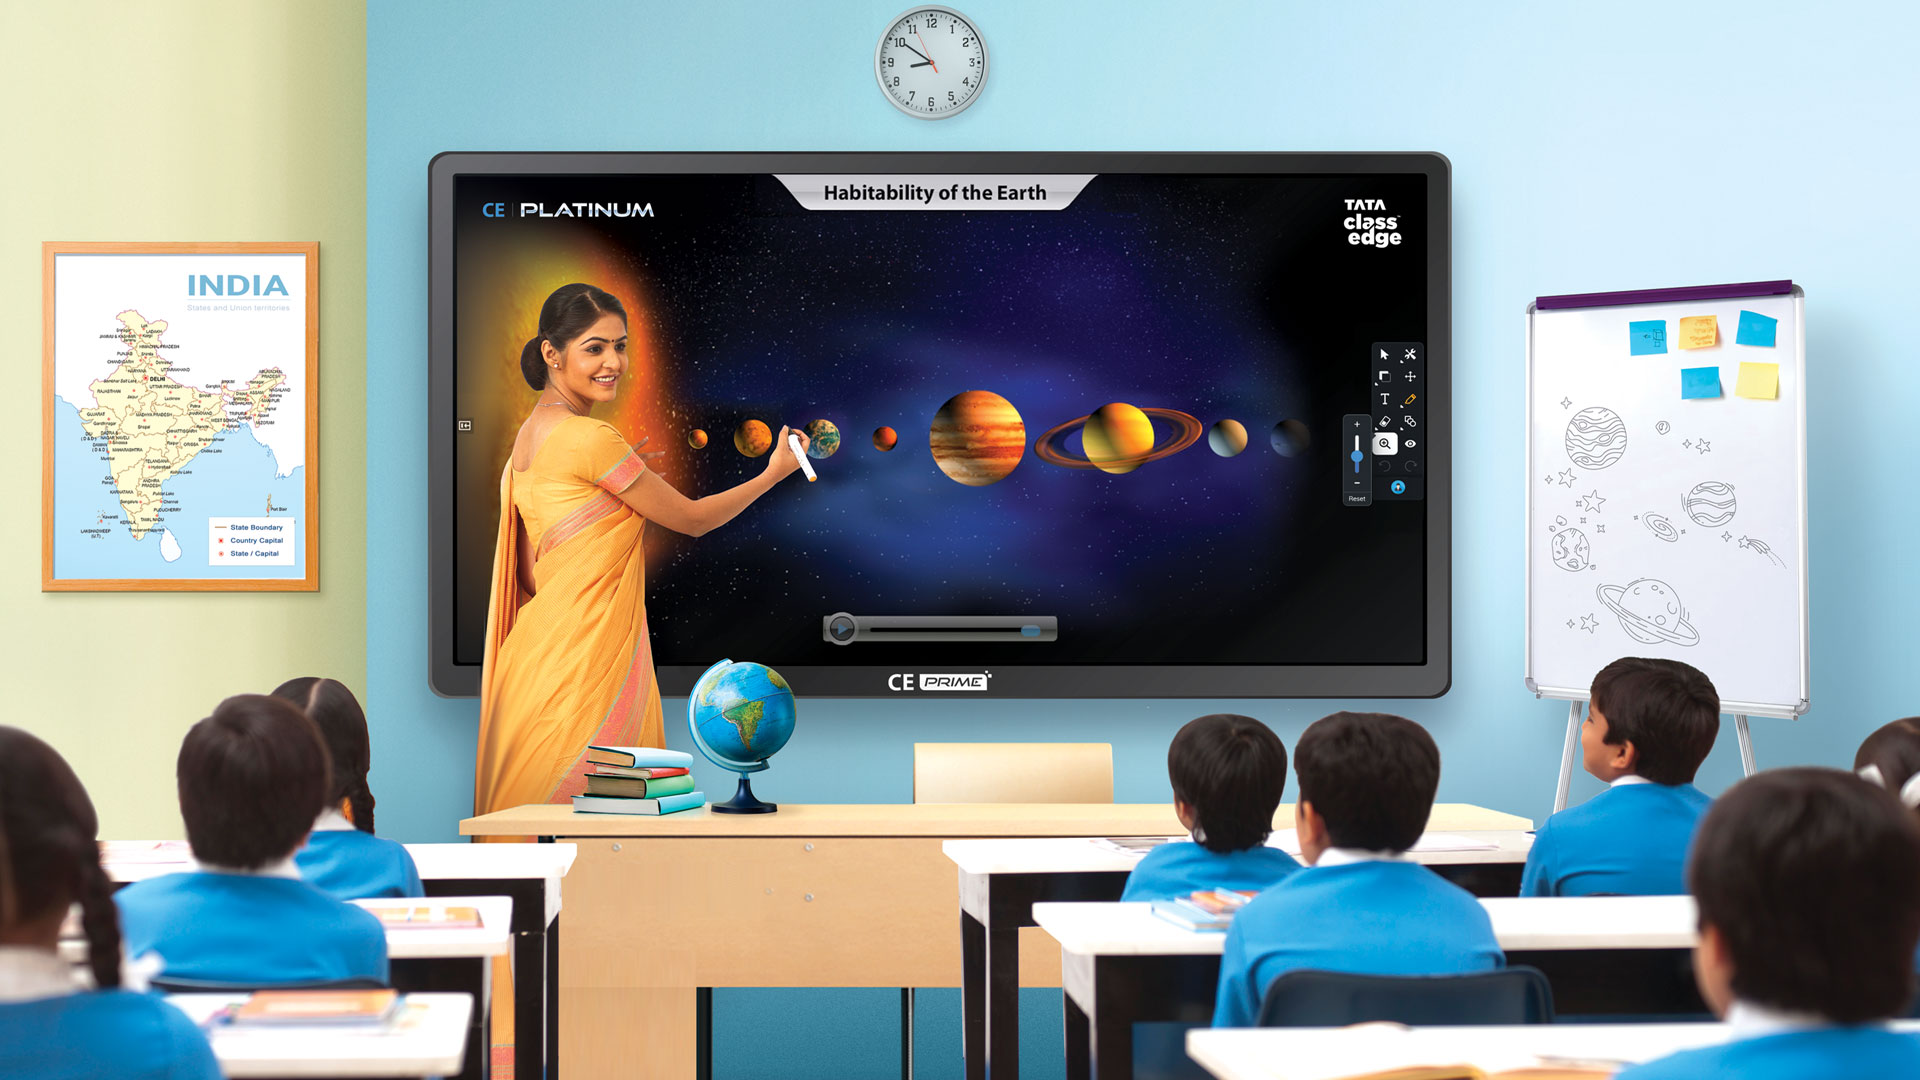 Tata Industries is incubating Tata Classedge that provides technology solutions for classroom teaching